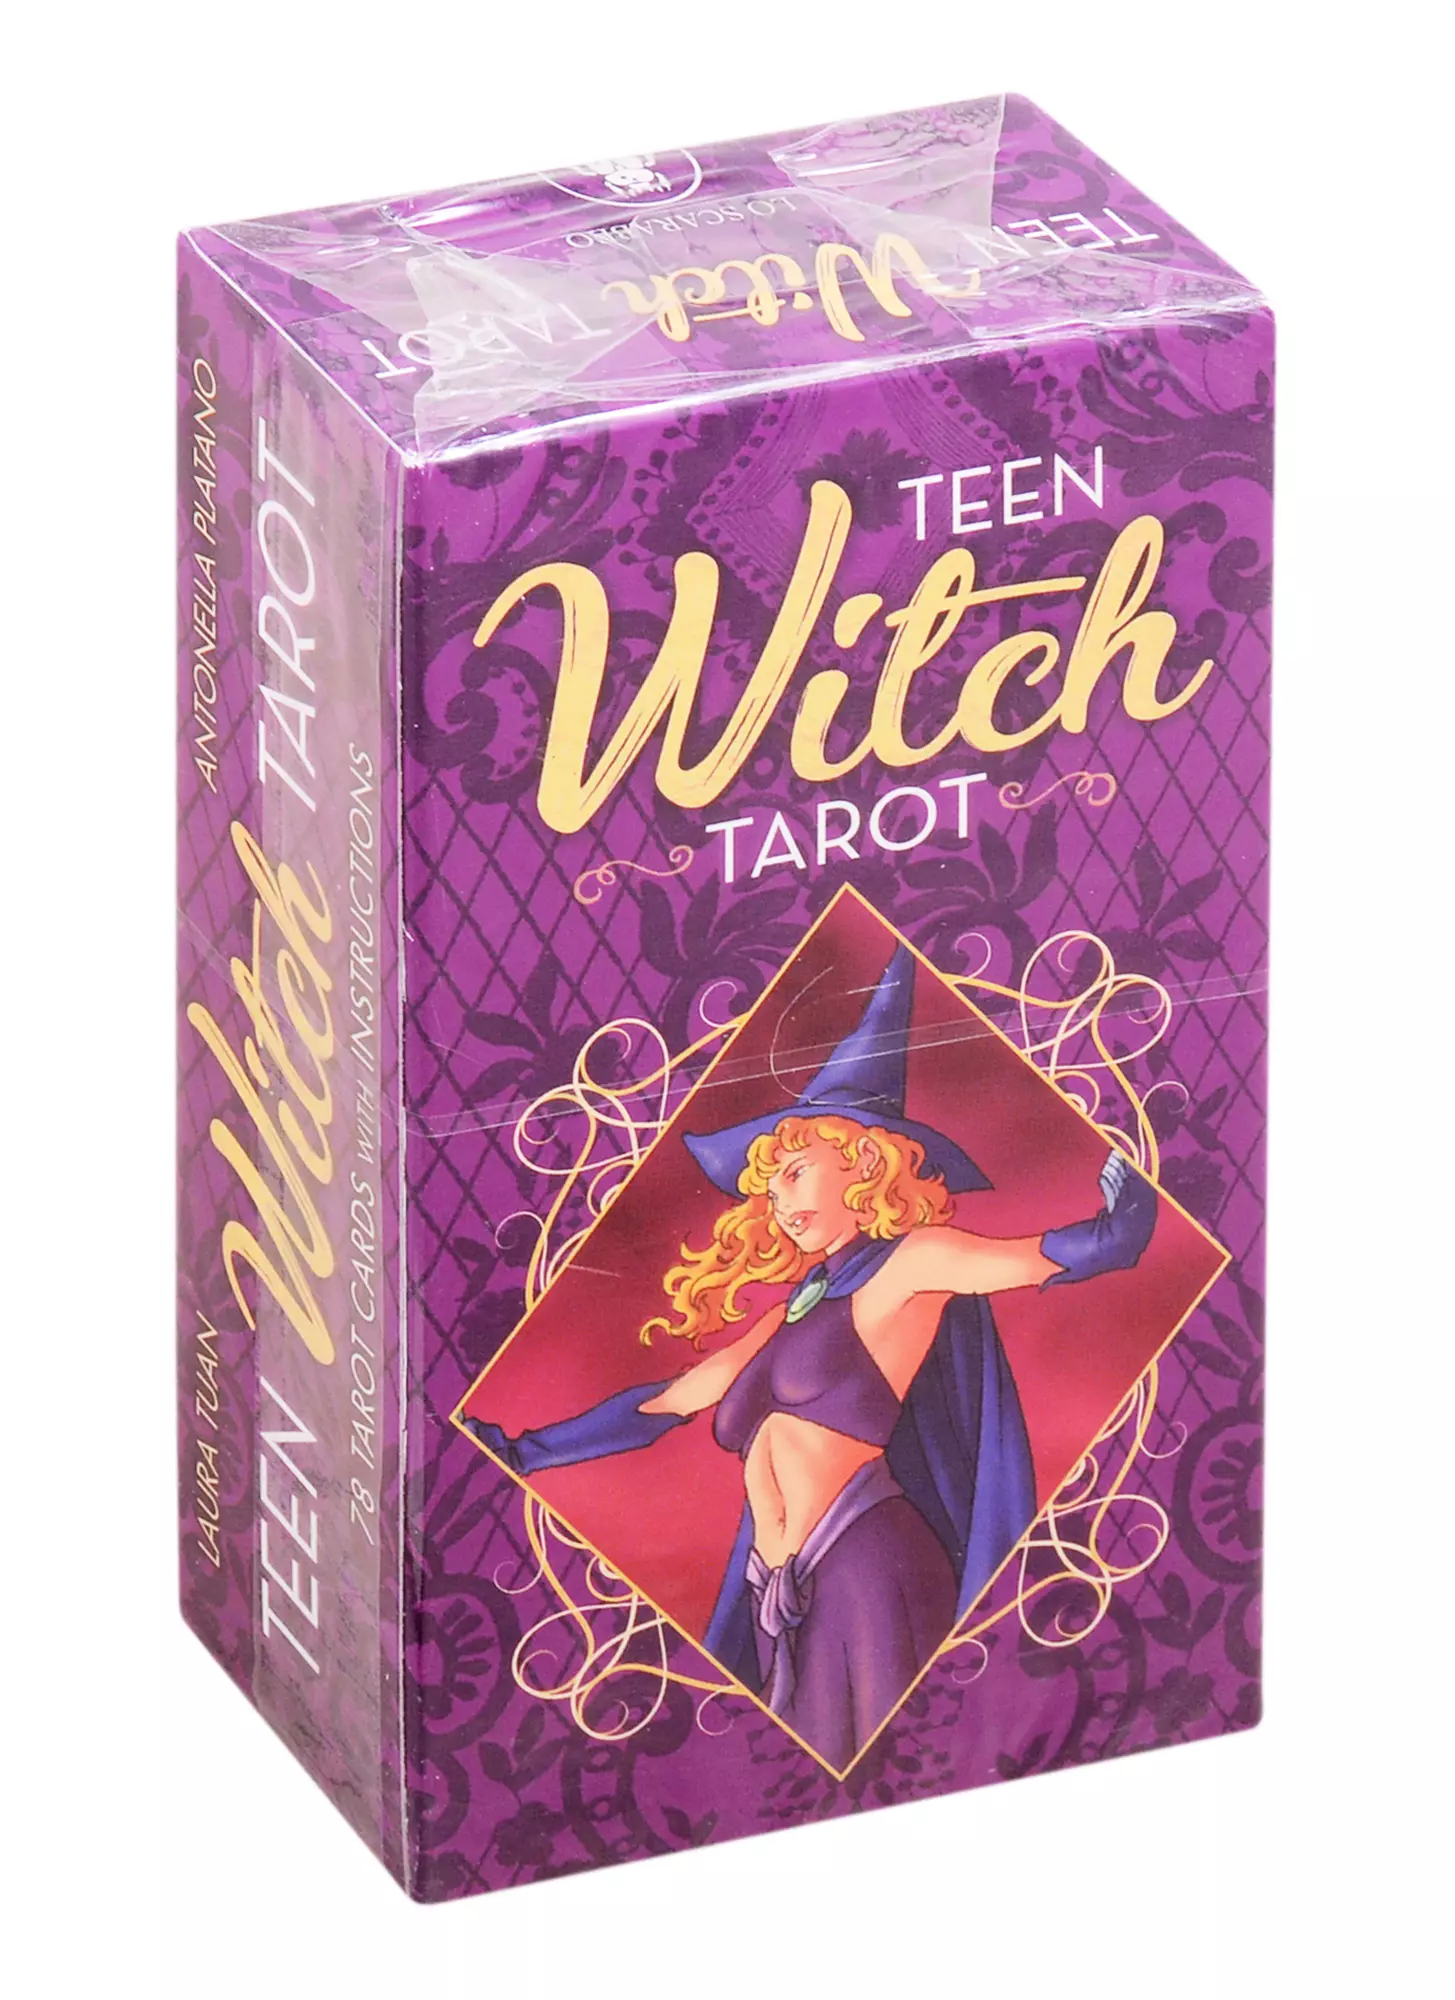 jamal r african american tarot 78 cards with instructions Таро Юных Ведьм / Teen Witch Tarot (78 Tarot Cards With Instructions)